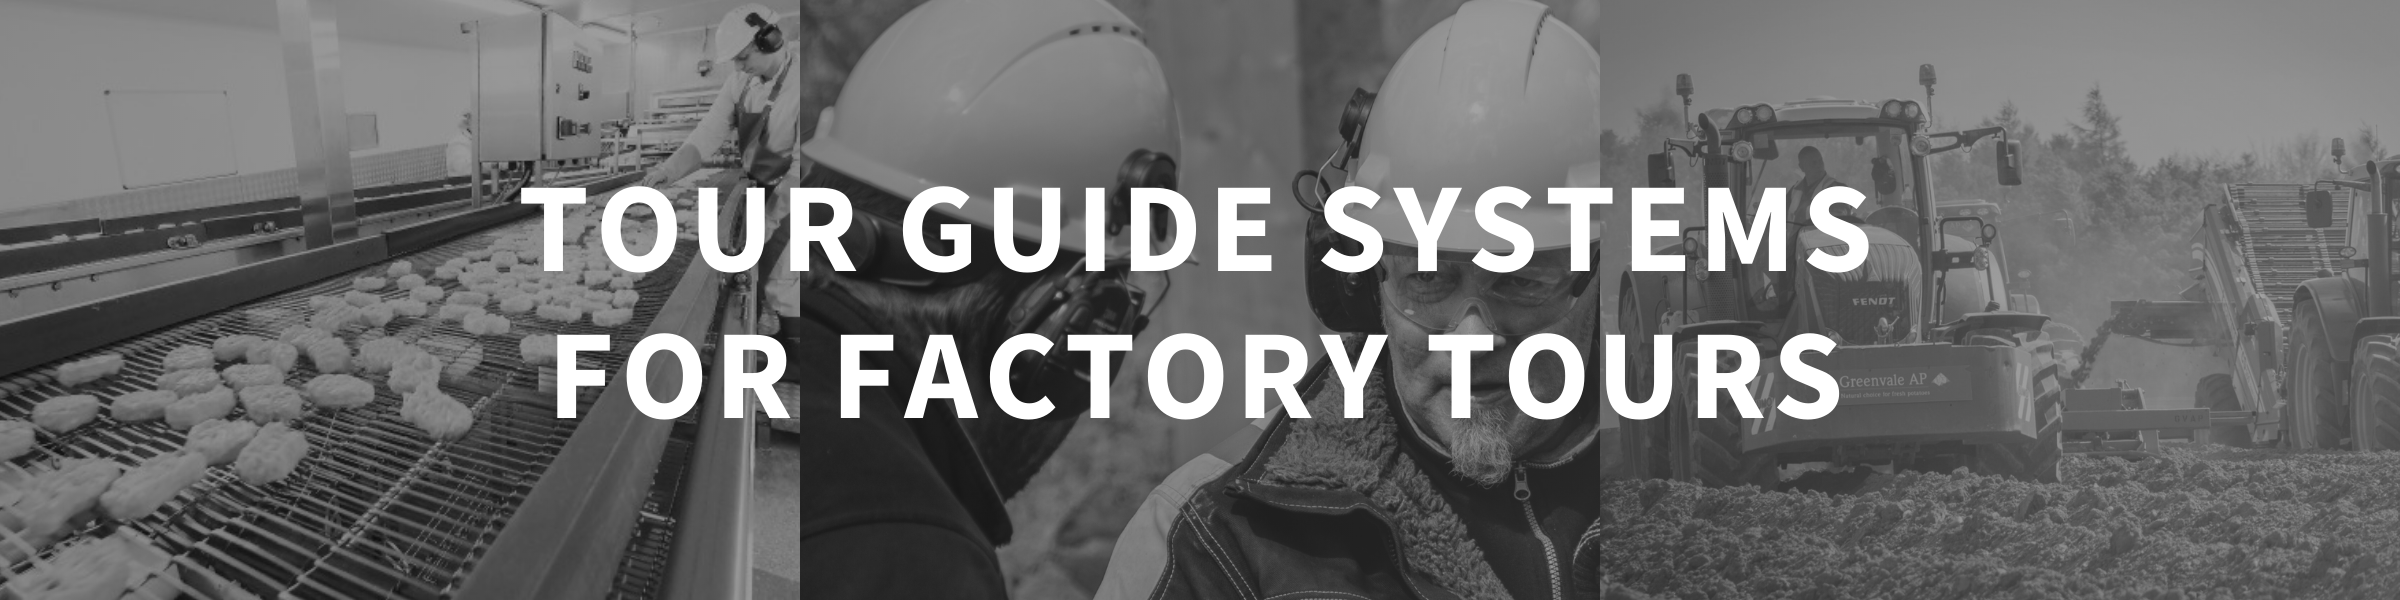 Tour Guide Systems for Factory Tours